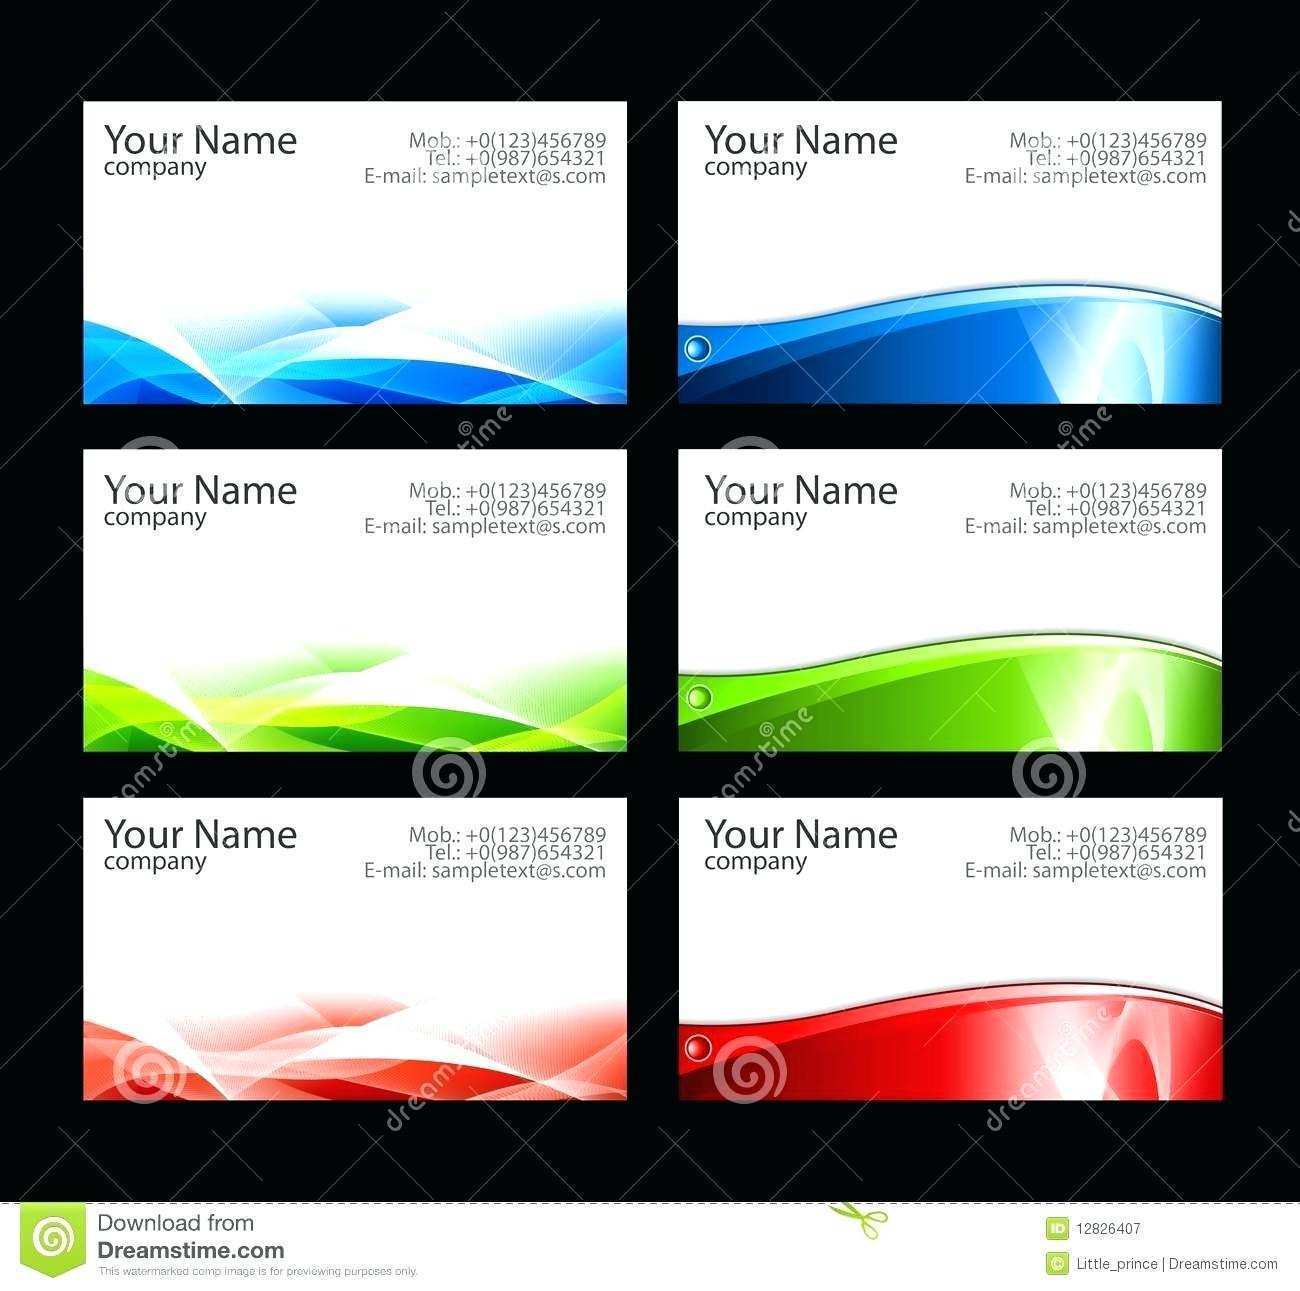 34 Format Business Card Template Download For Microsoft Word Layouts for Business Card Template Download For Microsoft Word